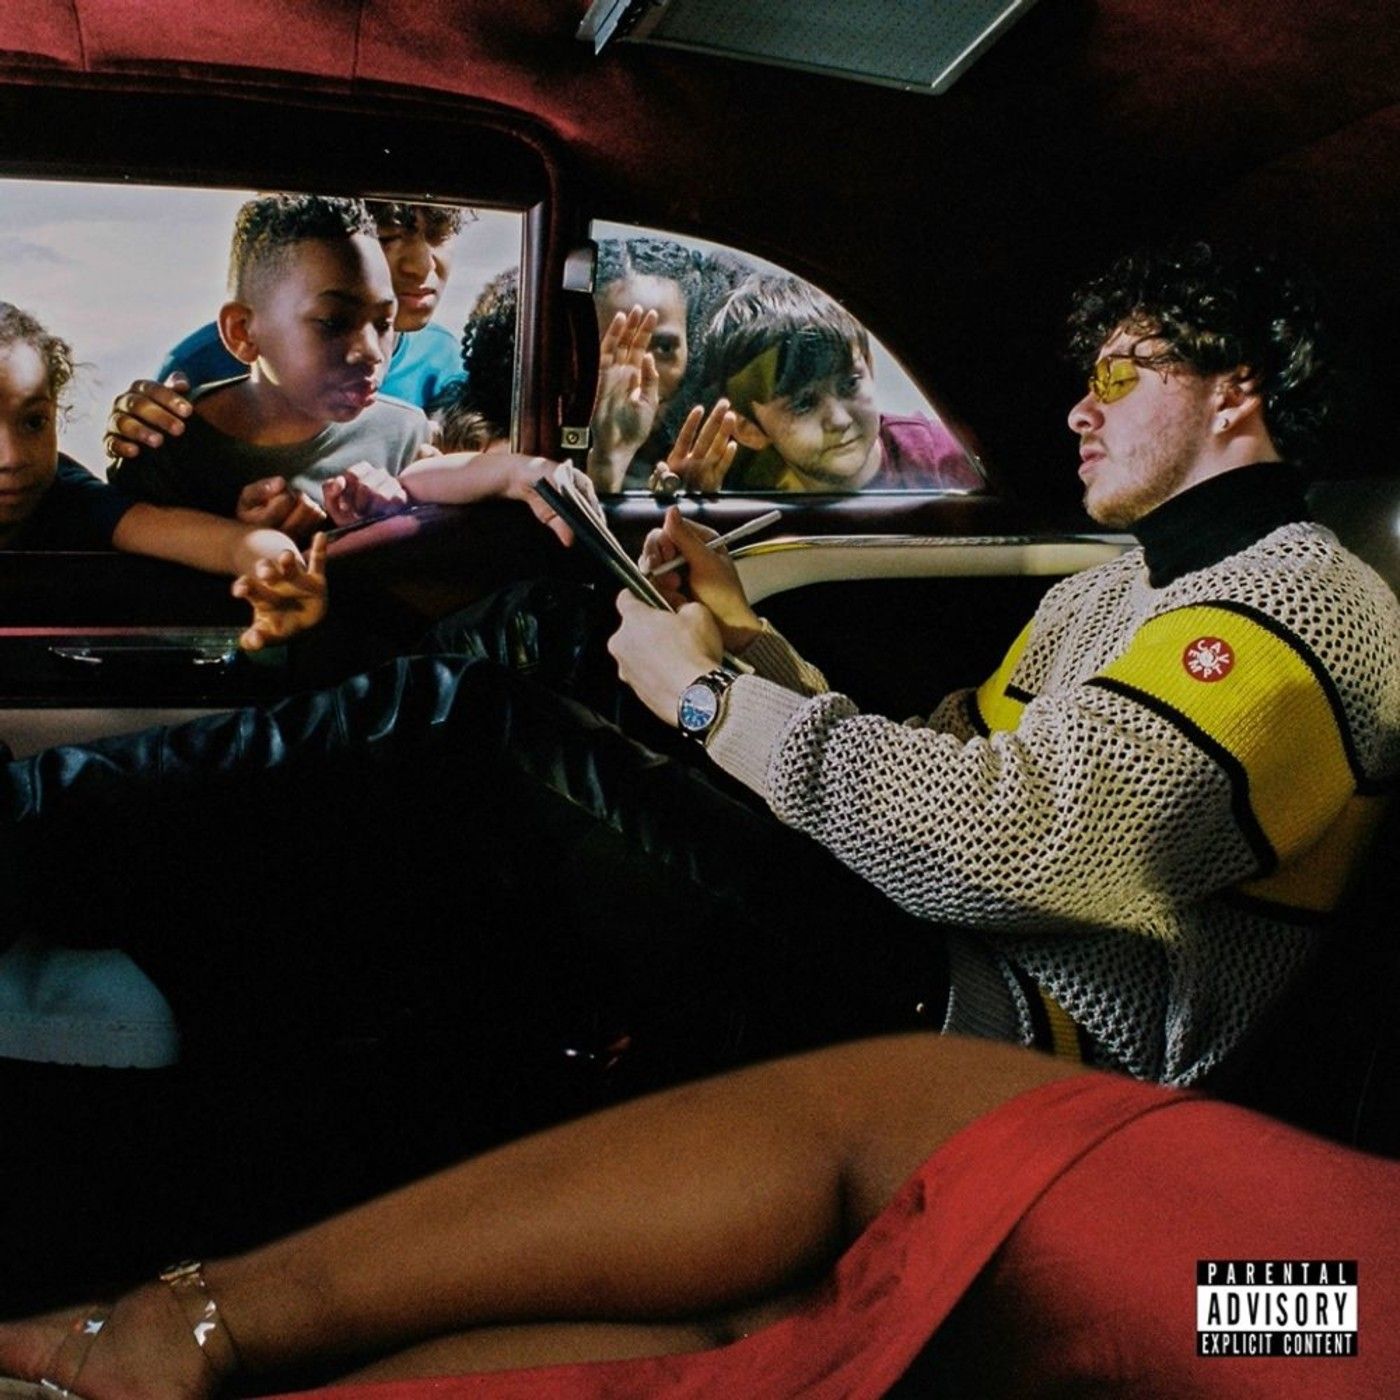 Imagem do álbum That What They All Say do(a) artista Jack Harlow